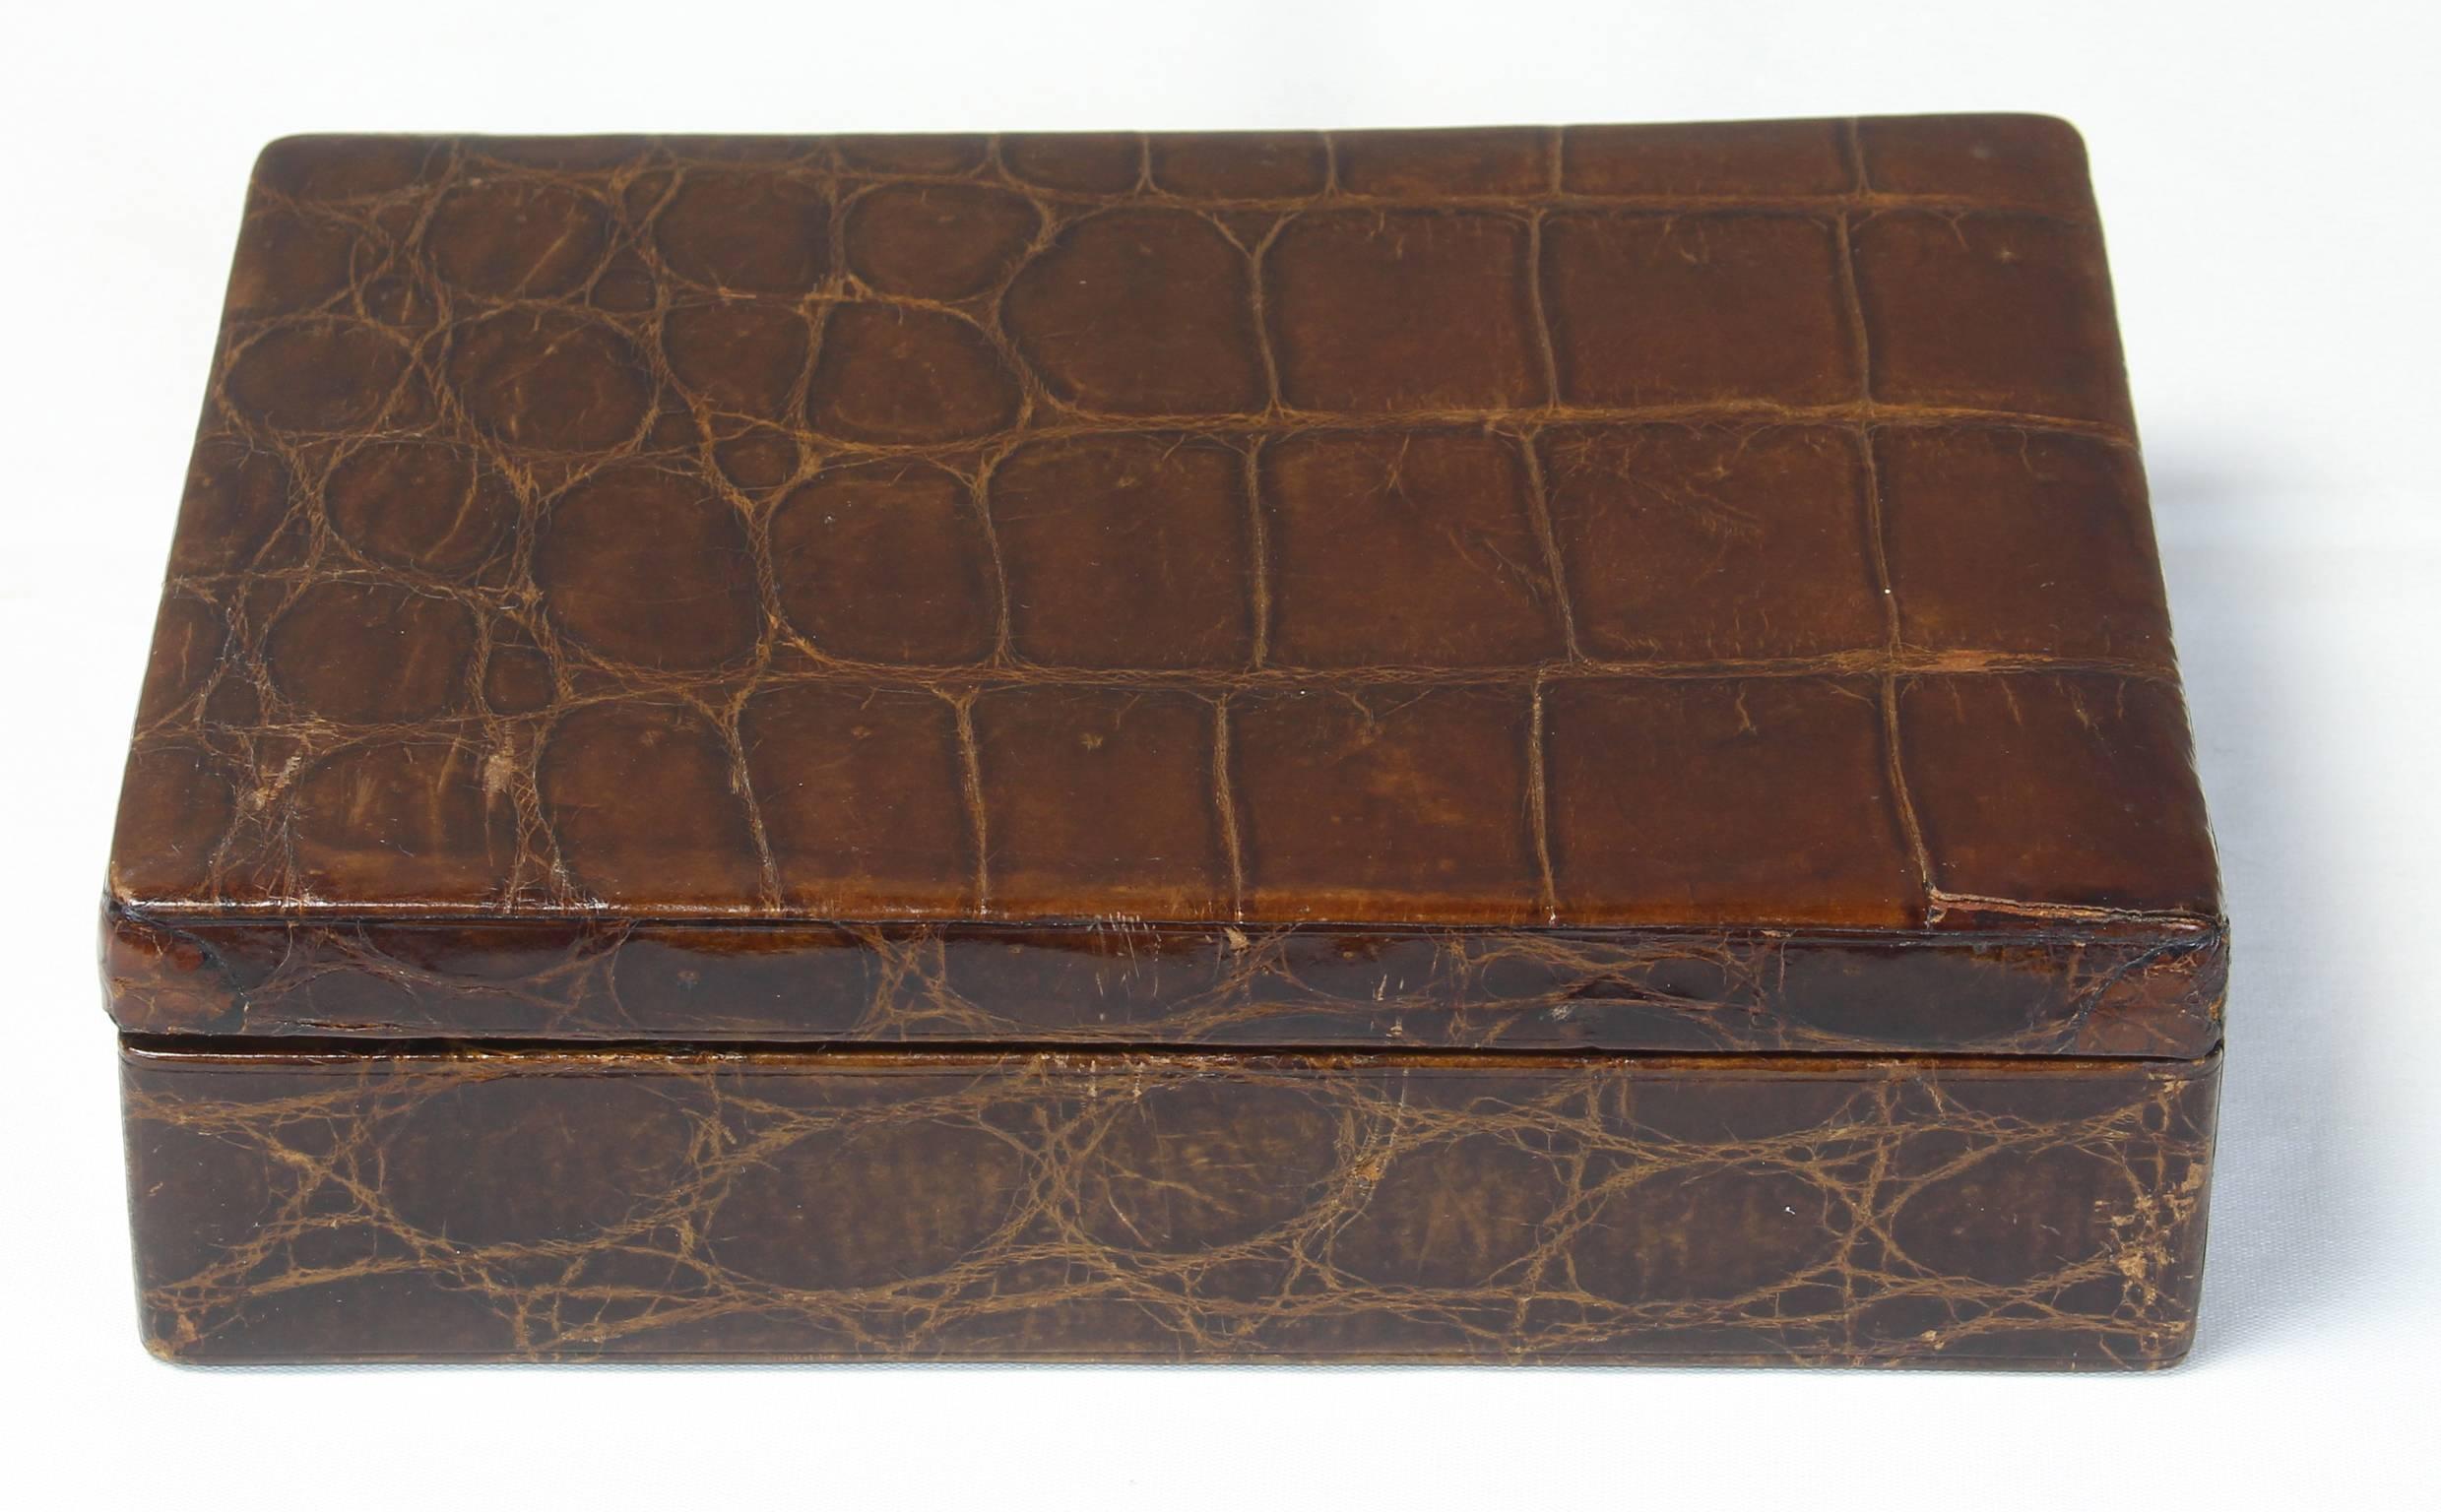 A large and elegant alligator covered box dating from the 1920s, perfect for a gentleman's dresser to receive cufflinks, watches and spare change.